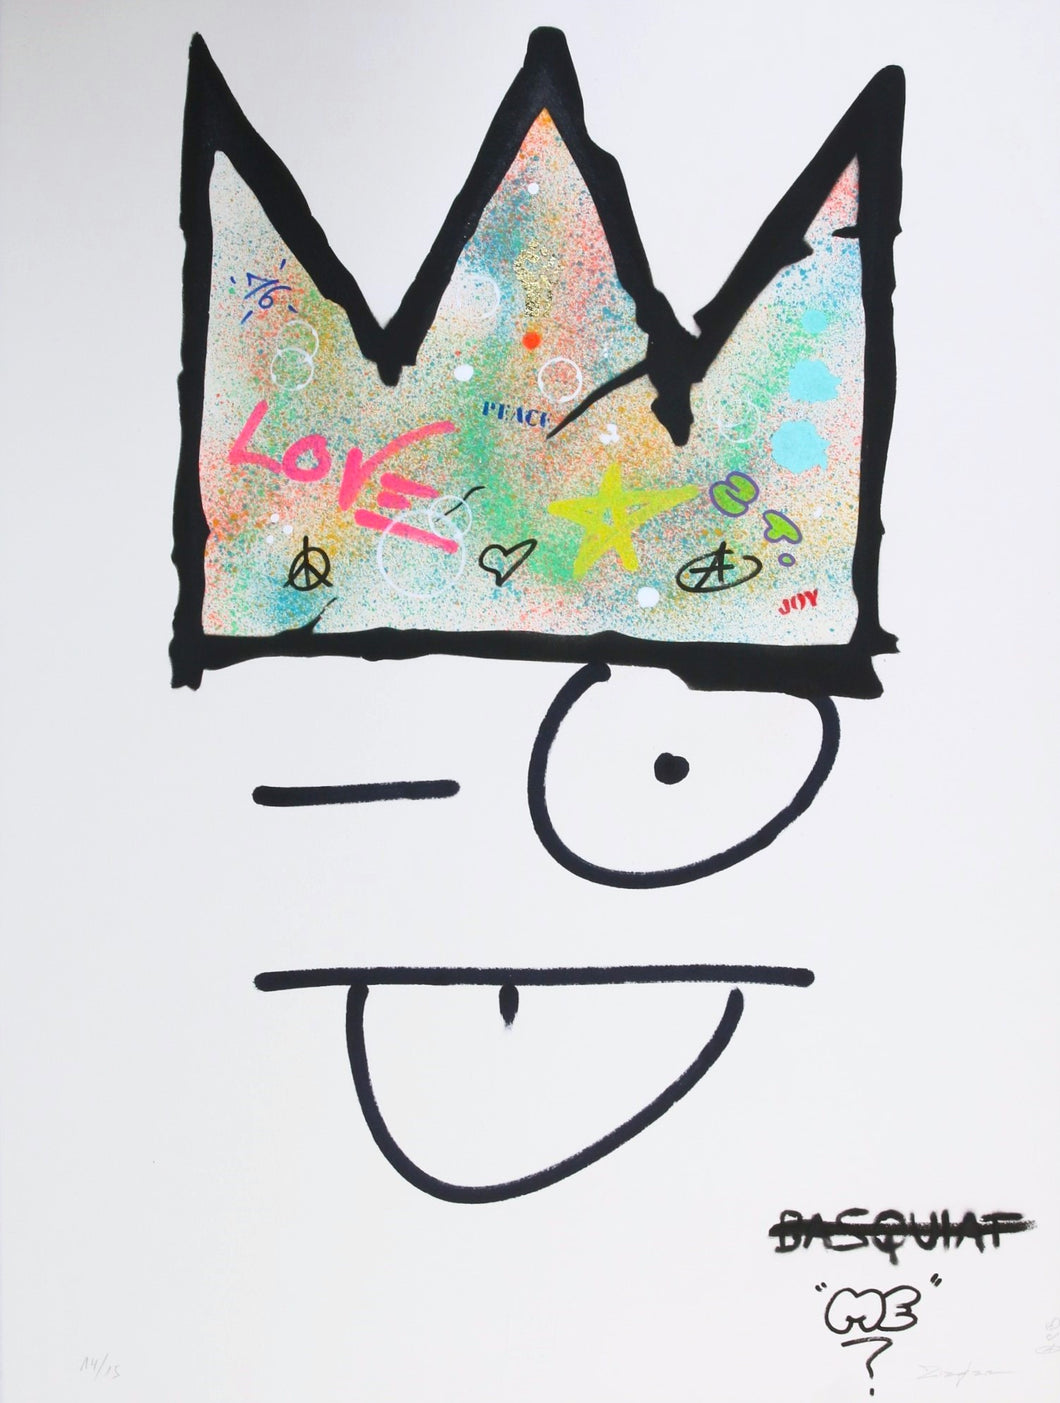 ZIEGLER T My Kid Just Ruined My Basquiat (Graf) - painting signed